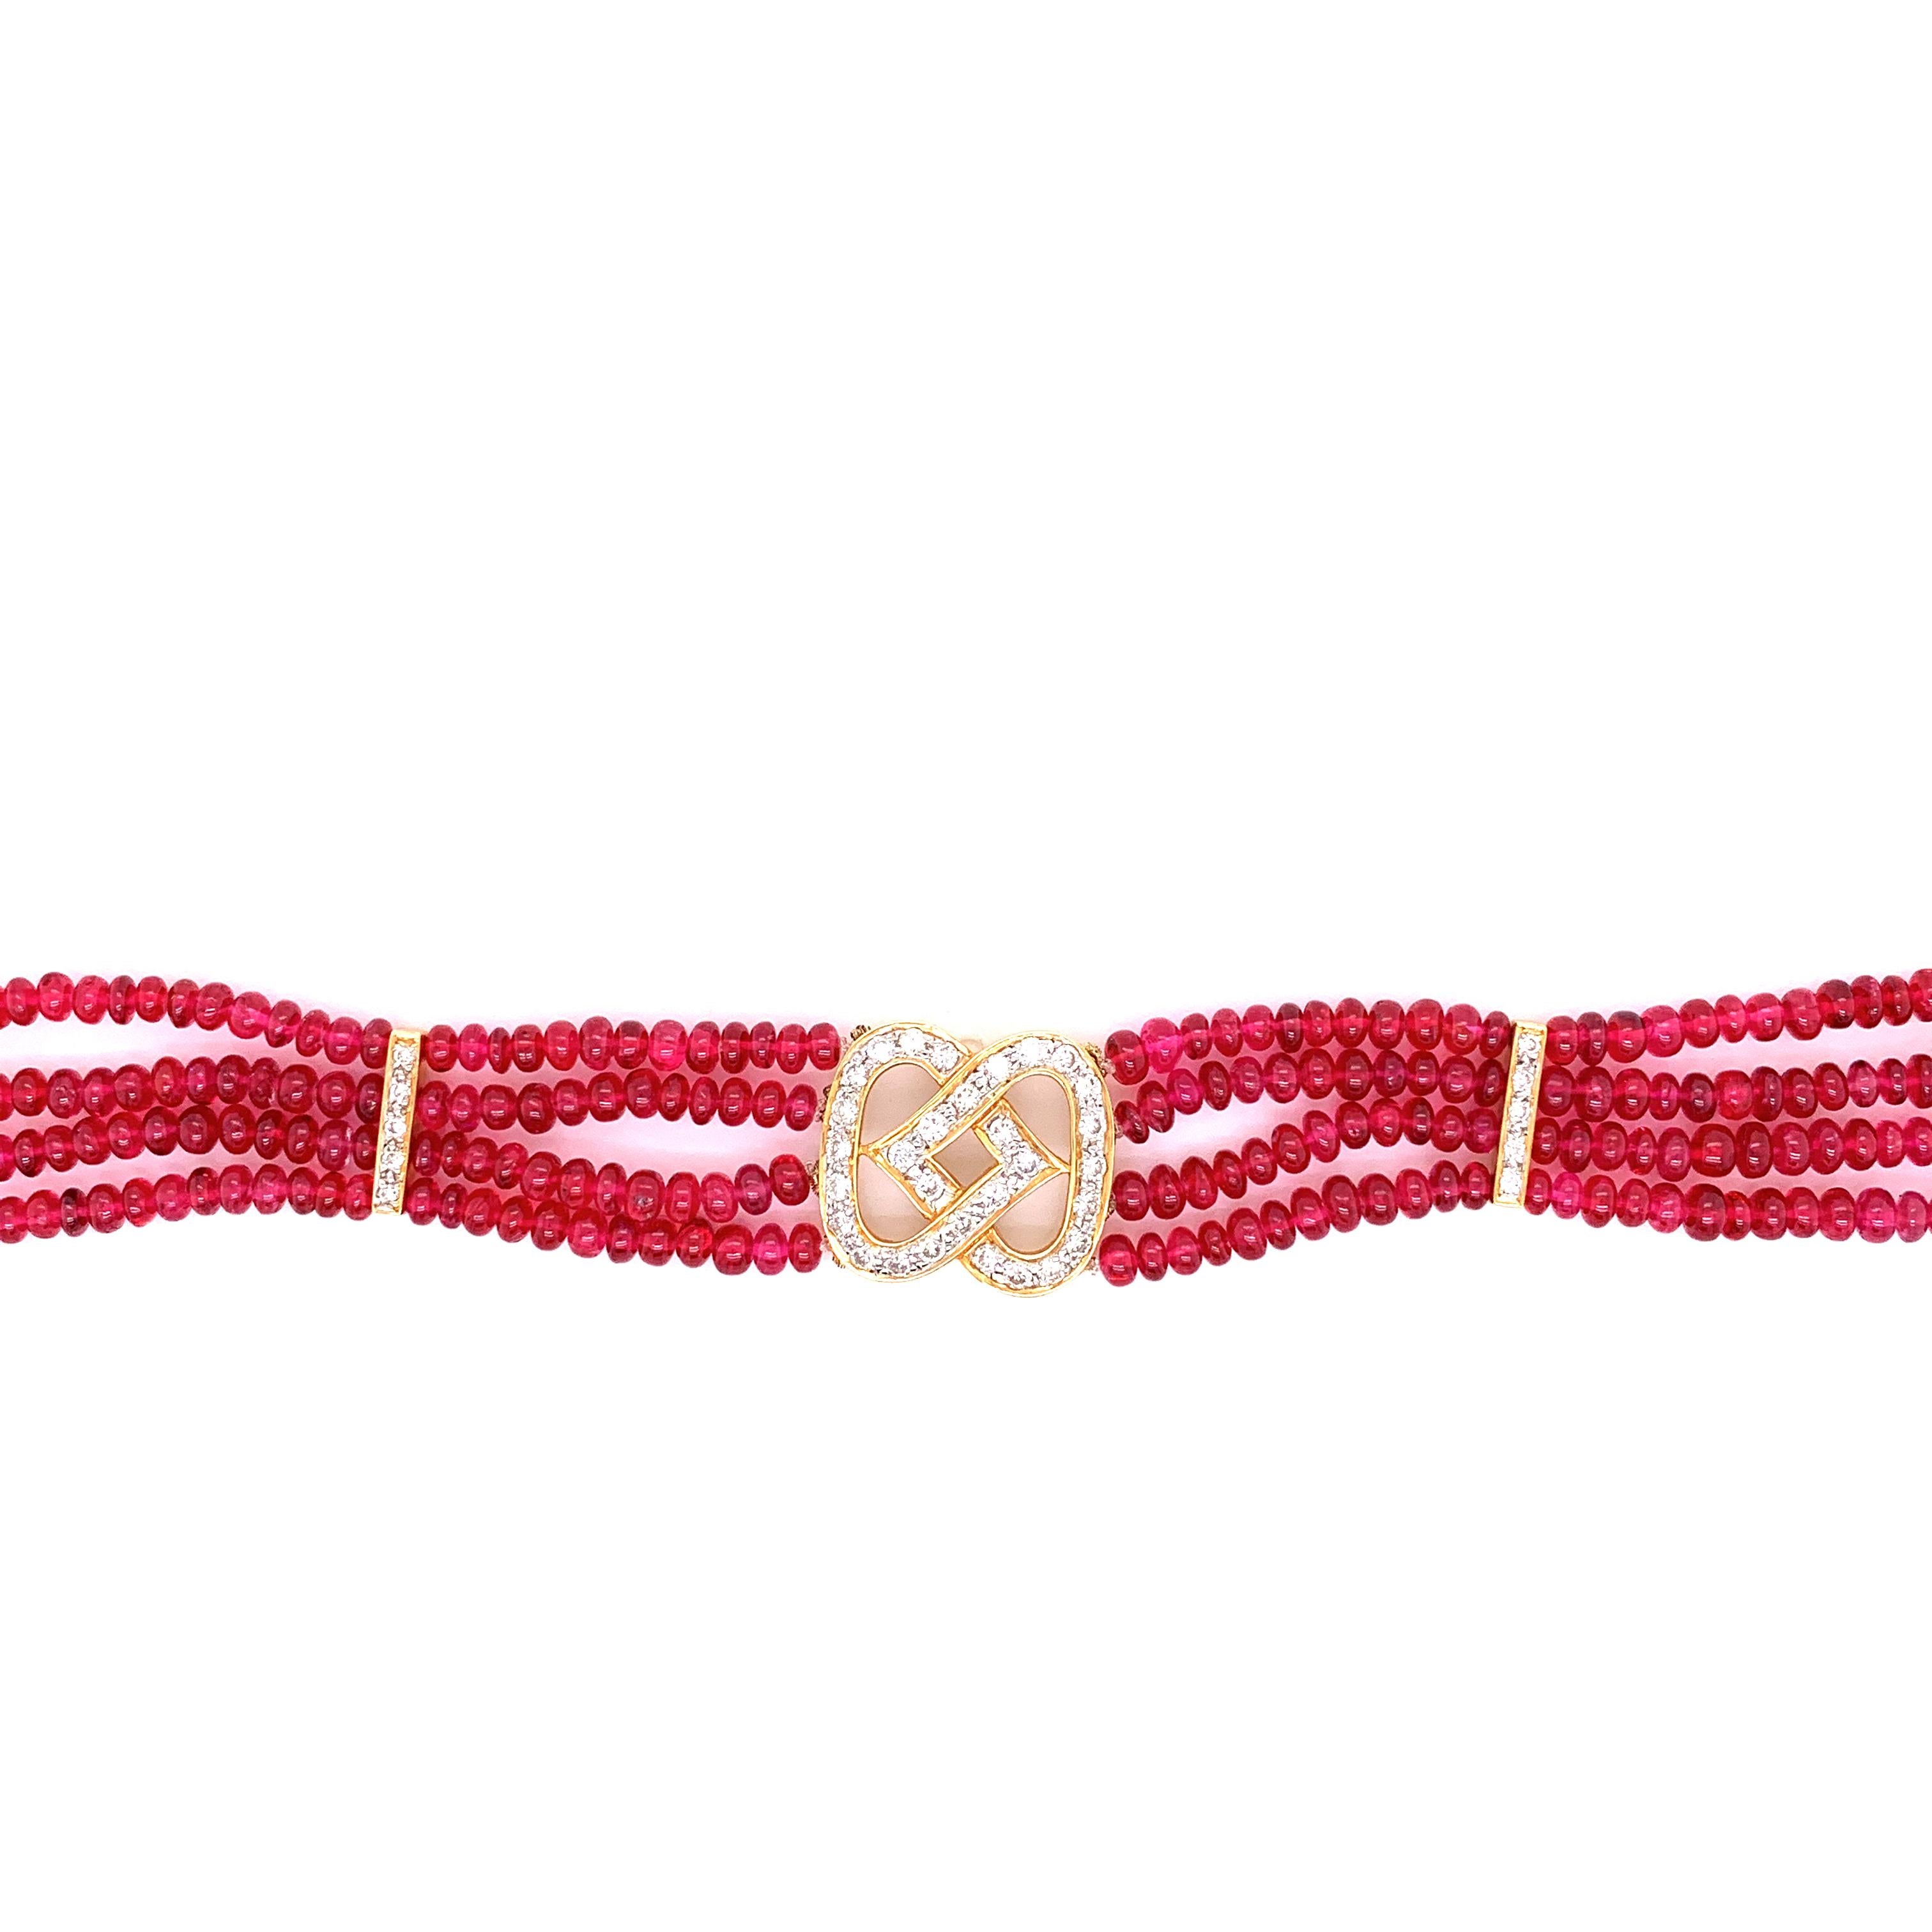 48 Carat Burmese Red Spinel Beads and White Diamond Gold Bracelet :

A very elegant bracelet, it features natural unheated vivid red spinel beads from Burma weighing 48 carat as well as a beautiful diamond clasp along two diamond bars situated on